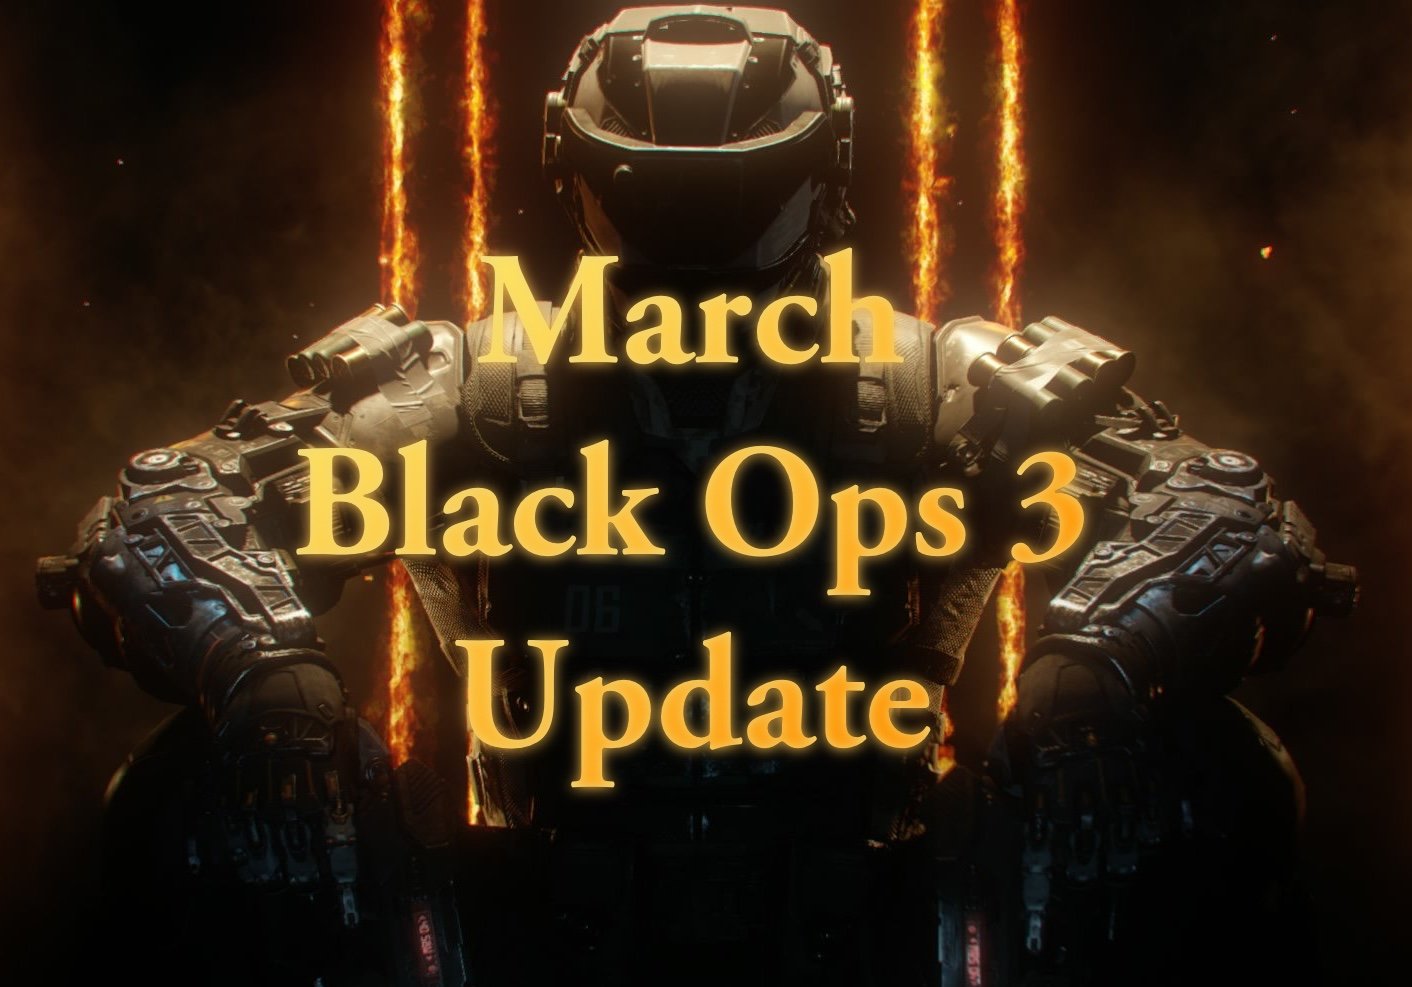 What you can expect from the March Black Ops 3 update.